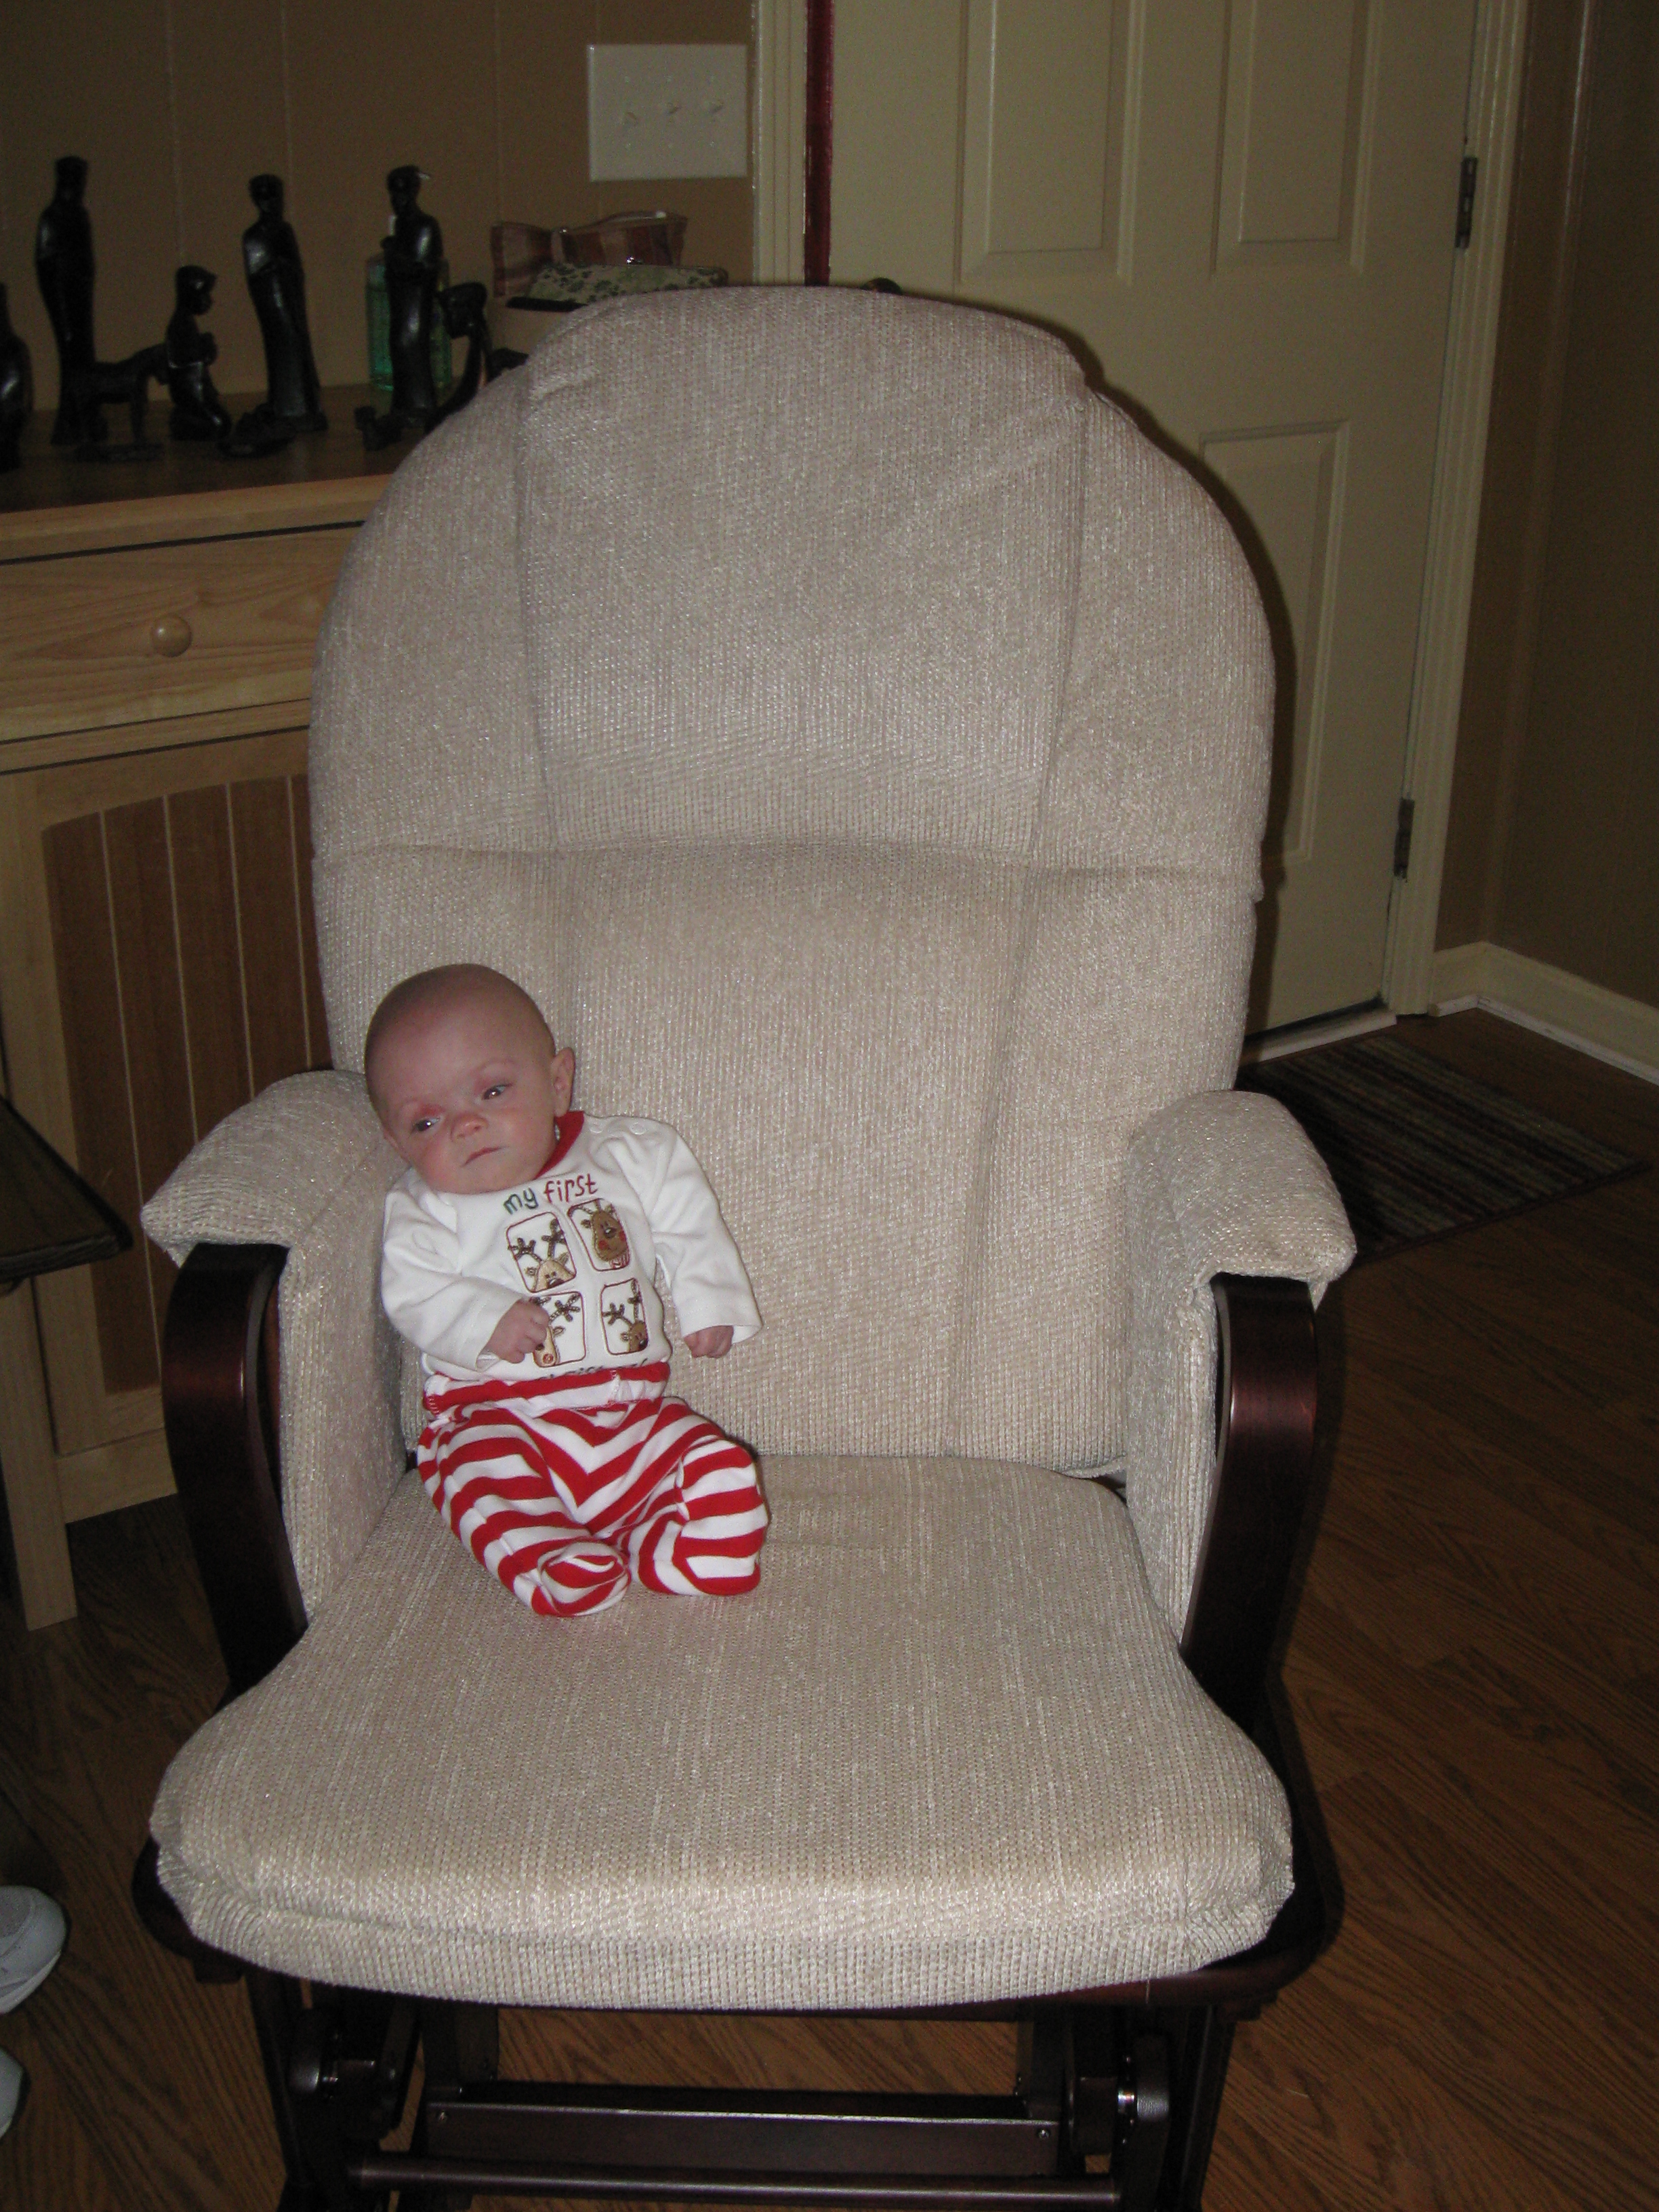 In my other new chair - my fancy rocker from our friends at Northside UMC.  Love it!